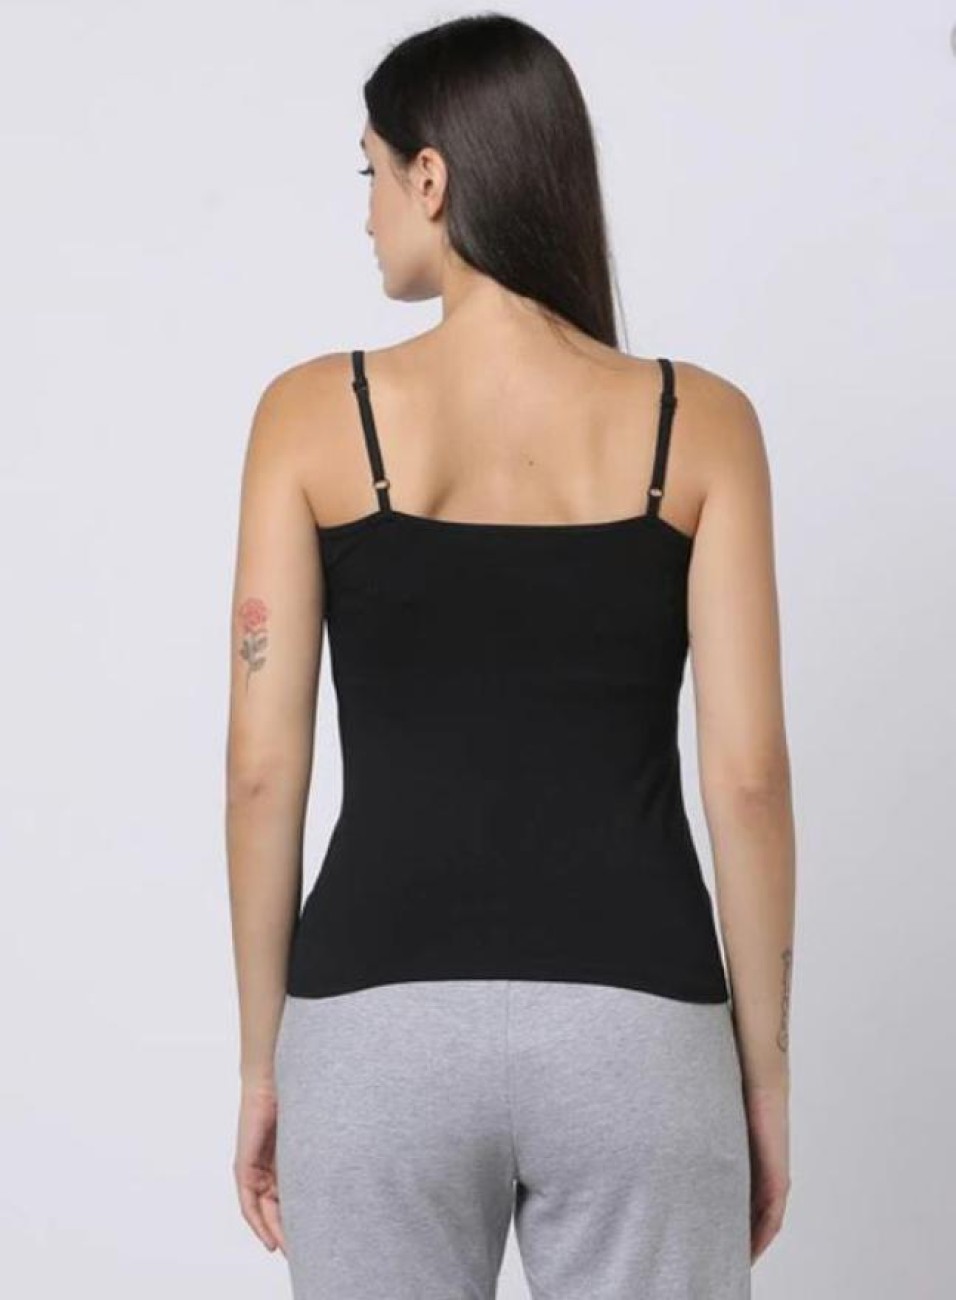 Evestacy Women Camisole - Buy Evestacy Women Camisole Online at